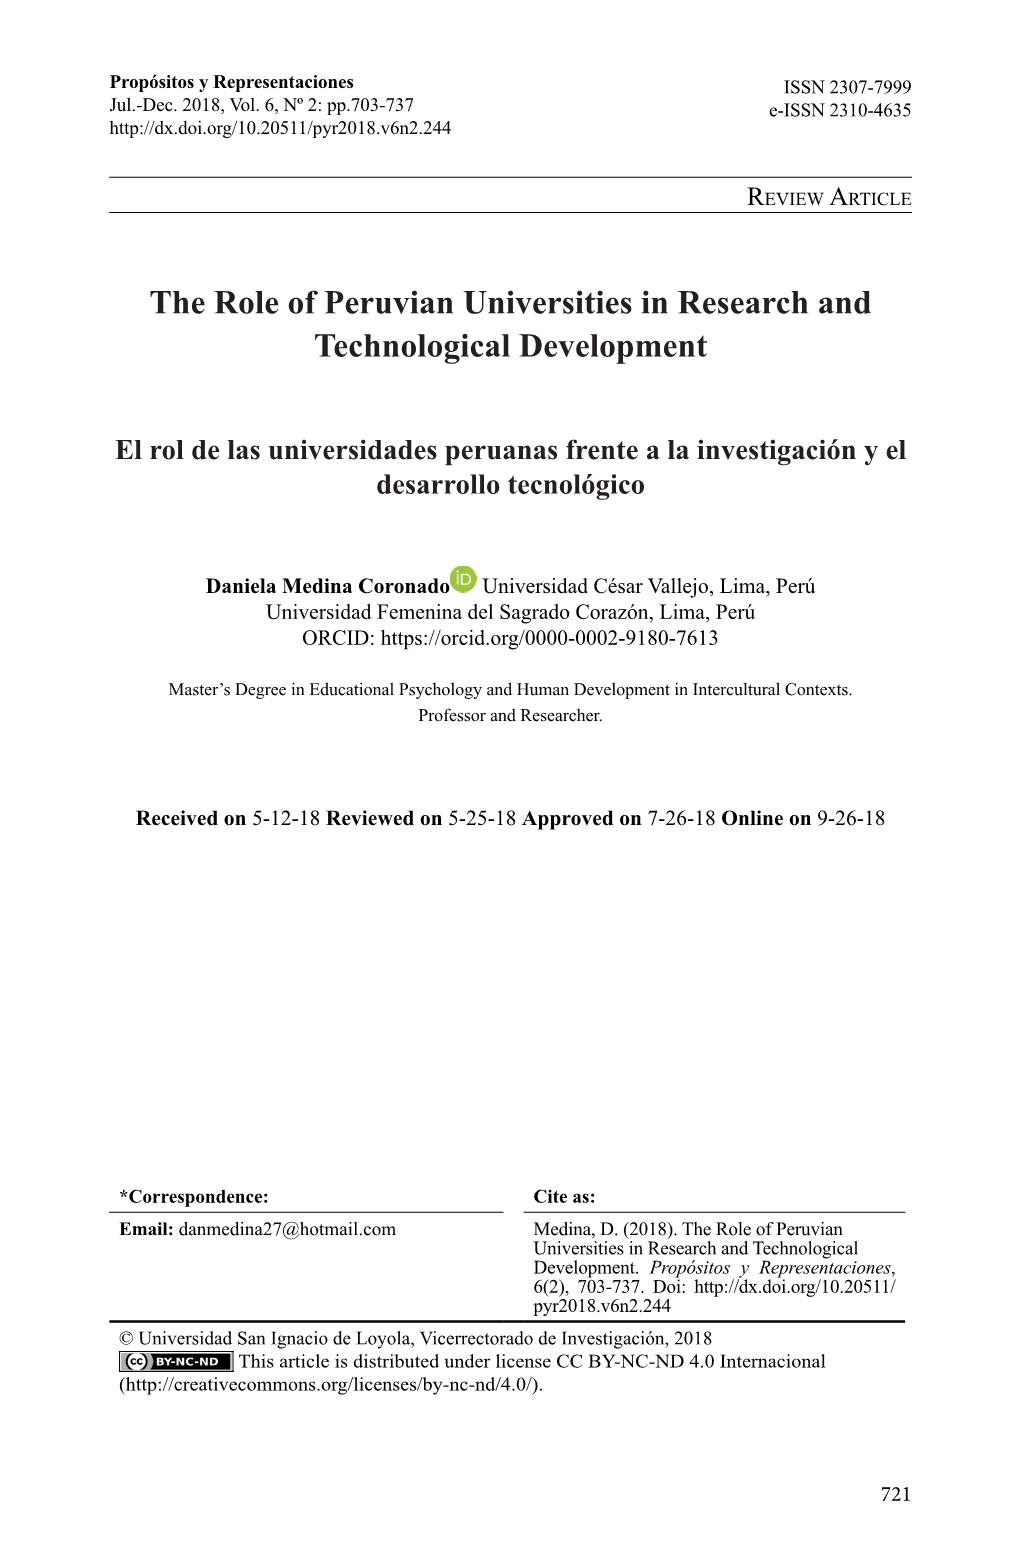 The Role of Peruvian Universities in Research and Technological Development